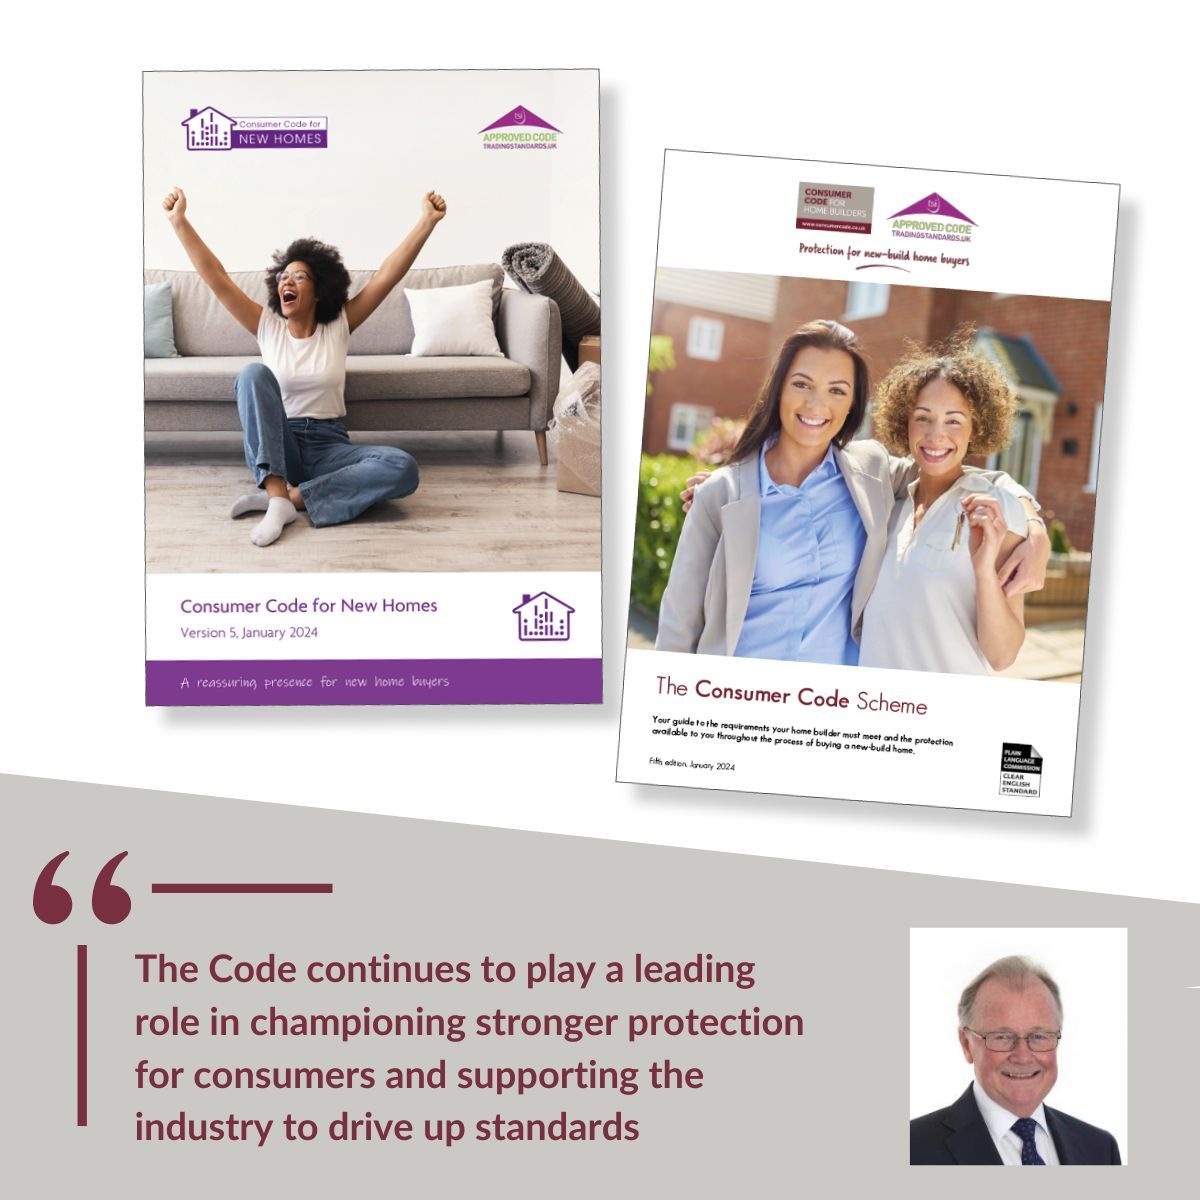 🔔 Read our latest announcement explaining how we’ve been working in partnership with the @for_code76655 to implement consistent standards for buyers of new build homes 👇 buff.ly/436gDzq @consumercodes #consumercodes